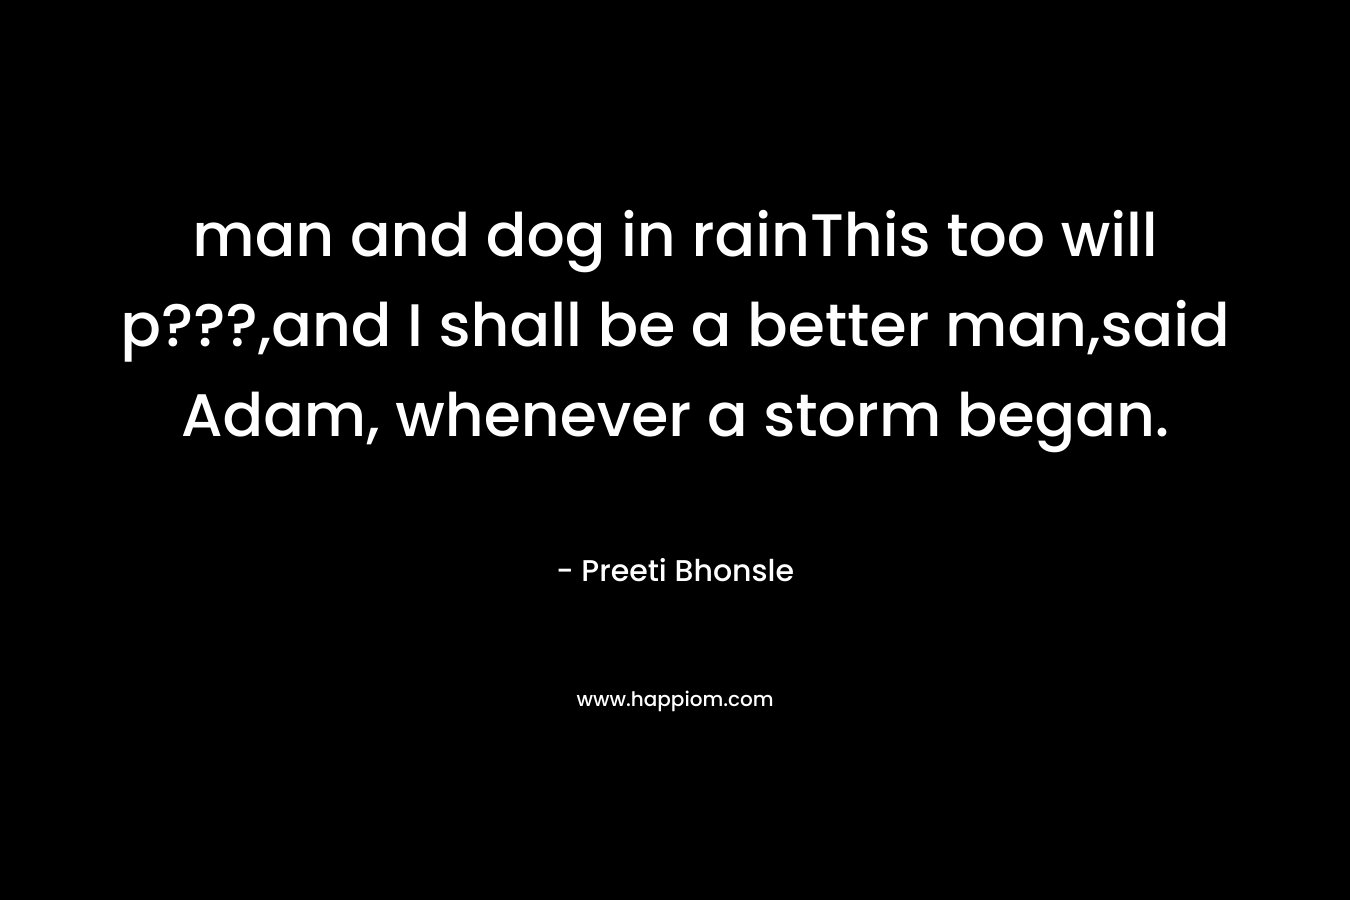 man and dog in rainThis too will p???,and I shall be a better man,said Adam, whenever a storm began. – Preeti Bhonsle